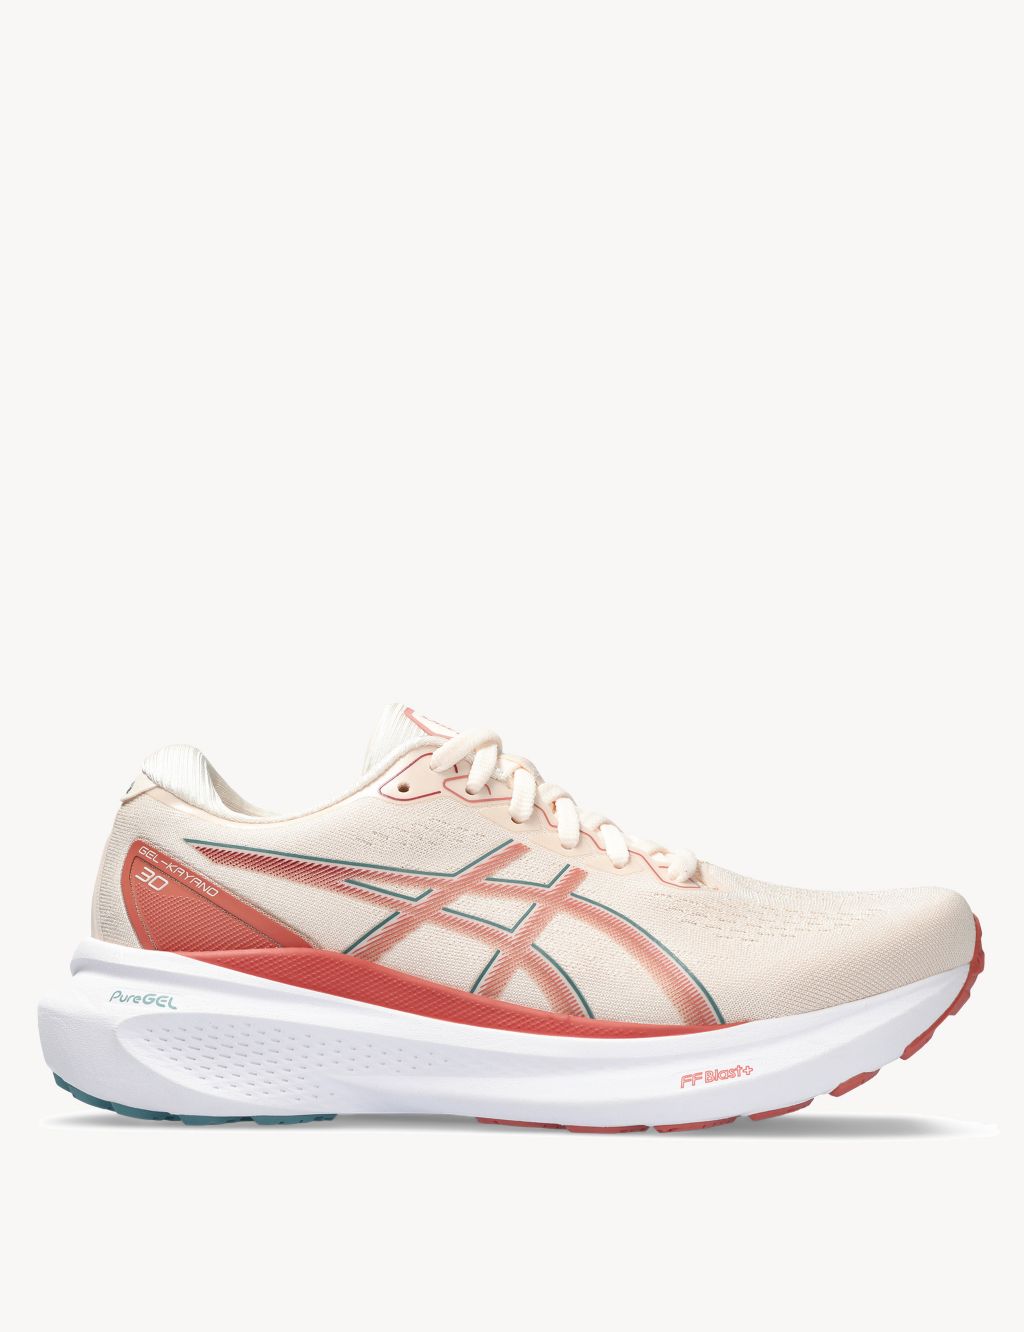 Gel-Kayano 30 Lace Up Trainers image 1